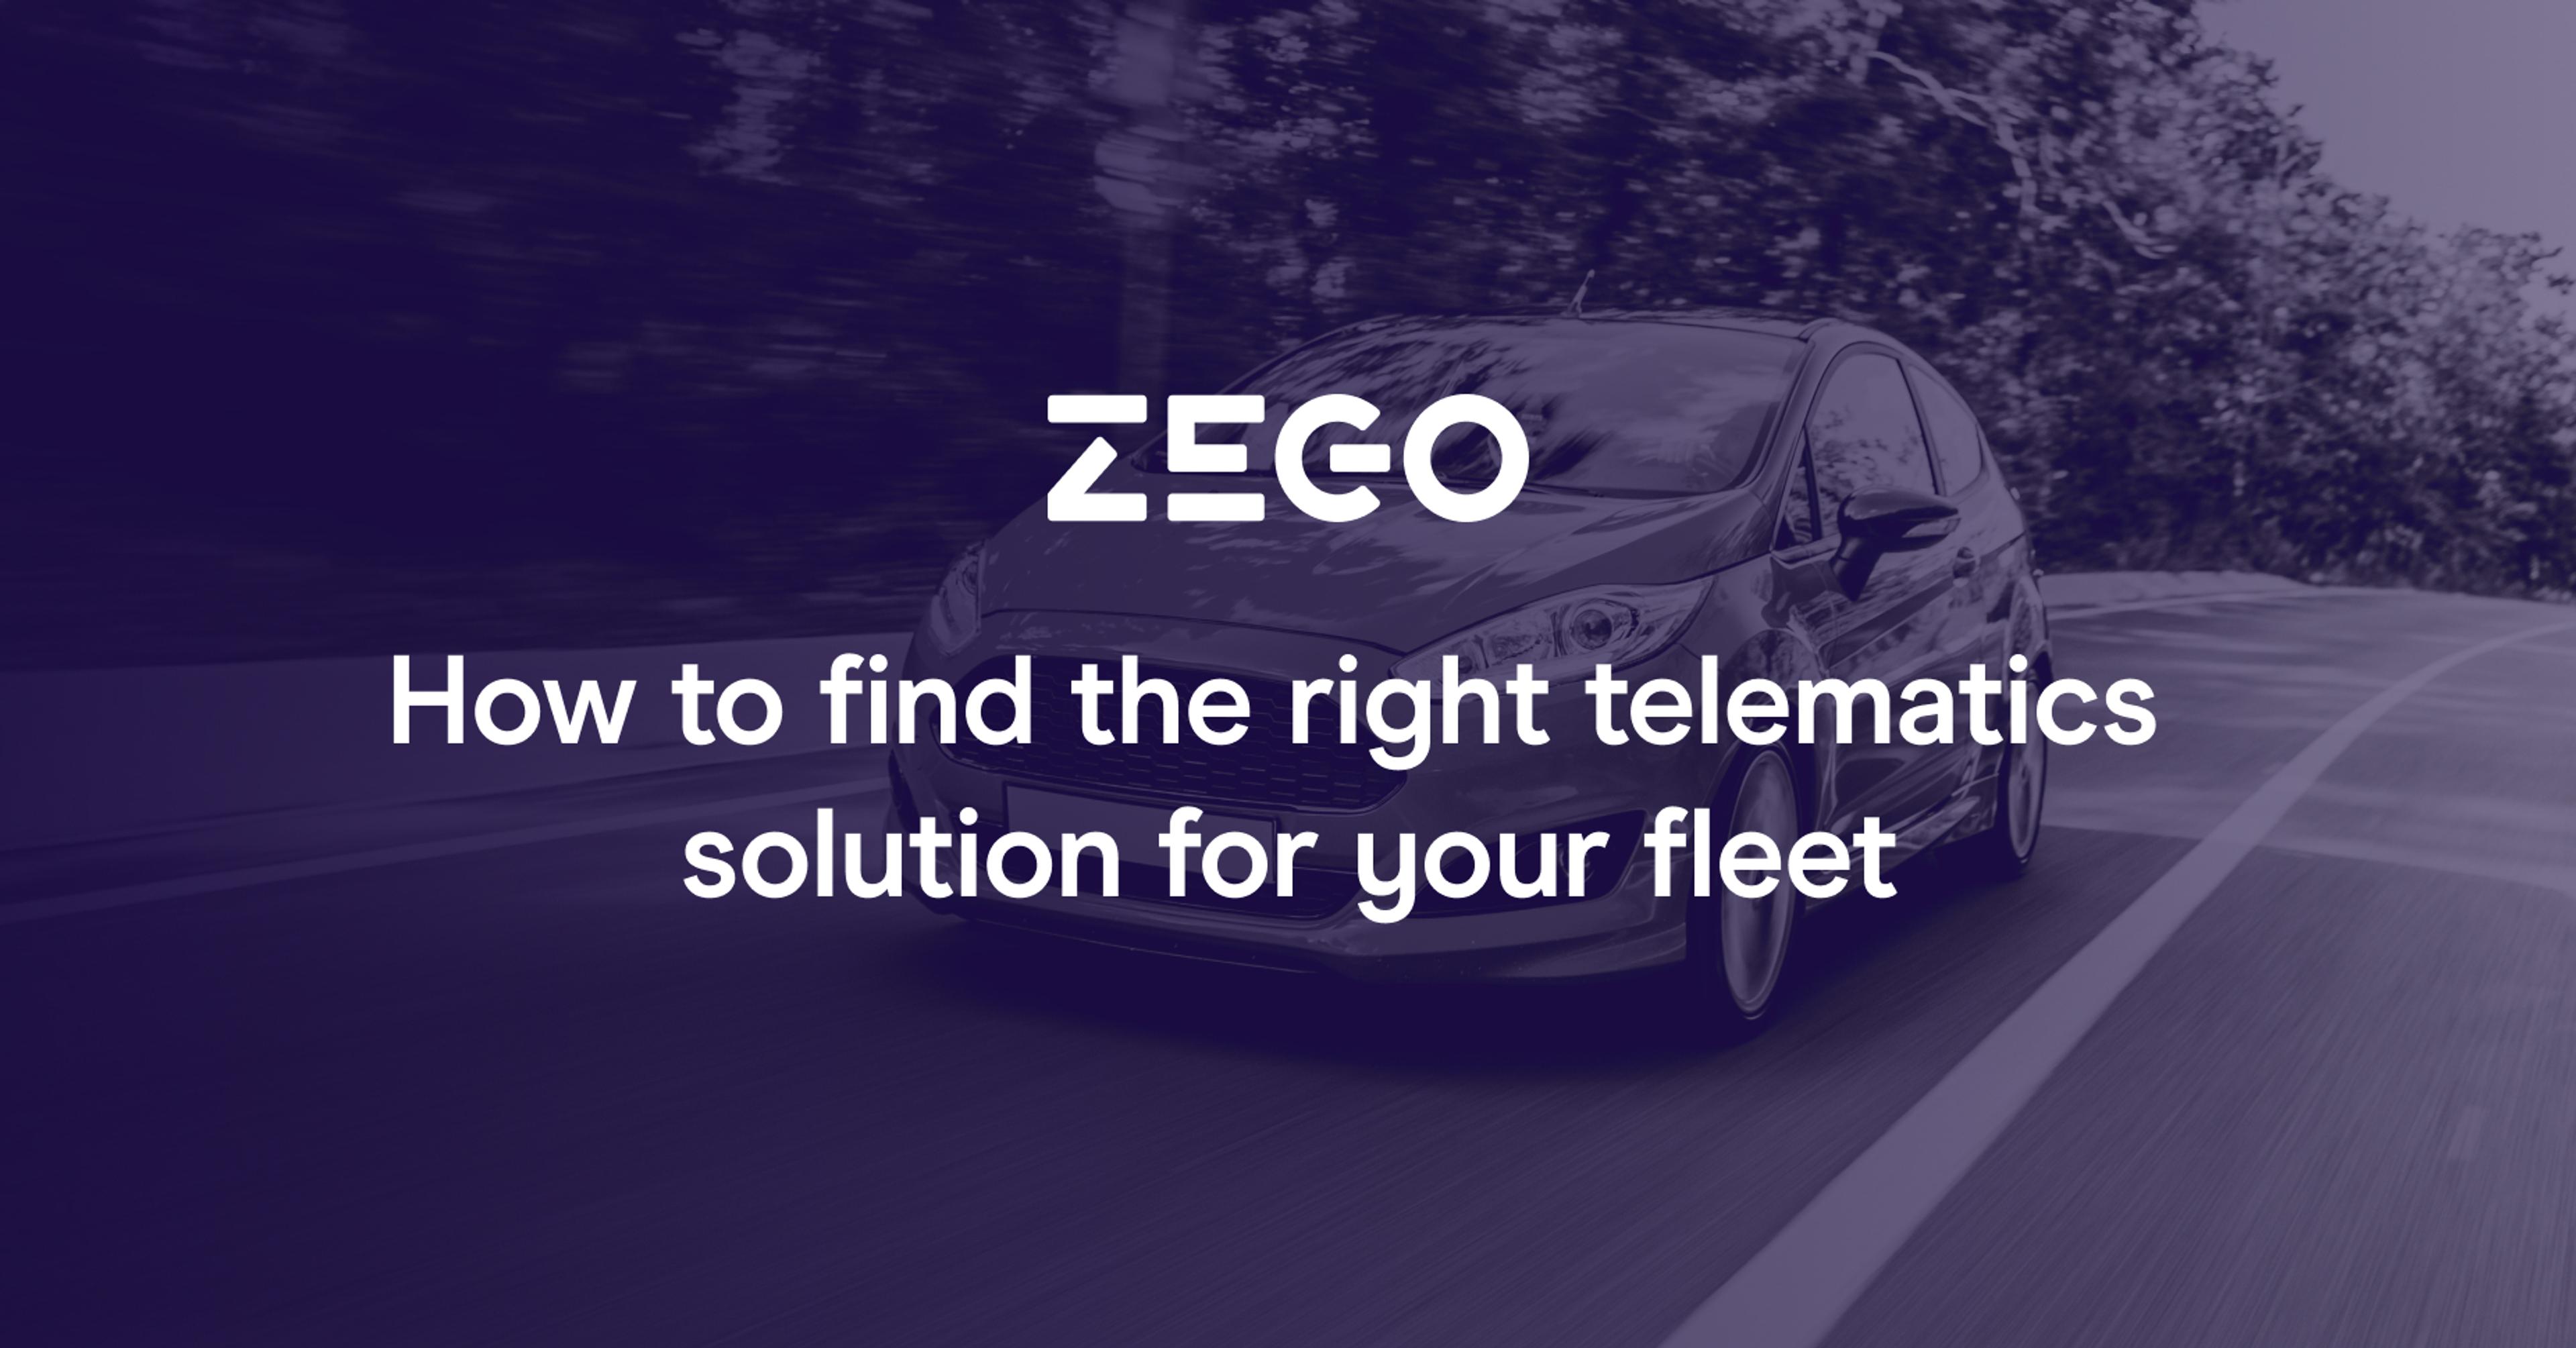 How to find the right telematics solution for your fleet